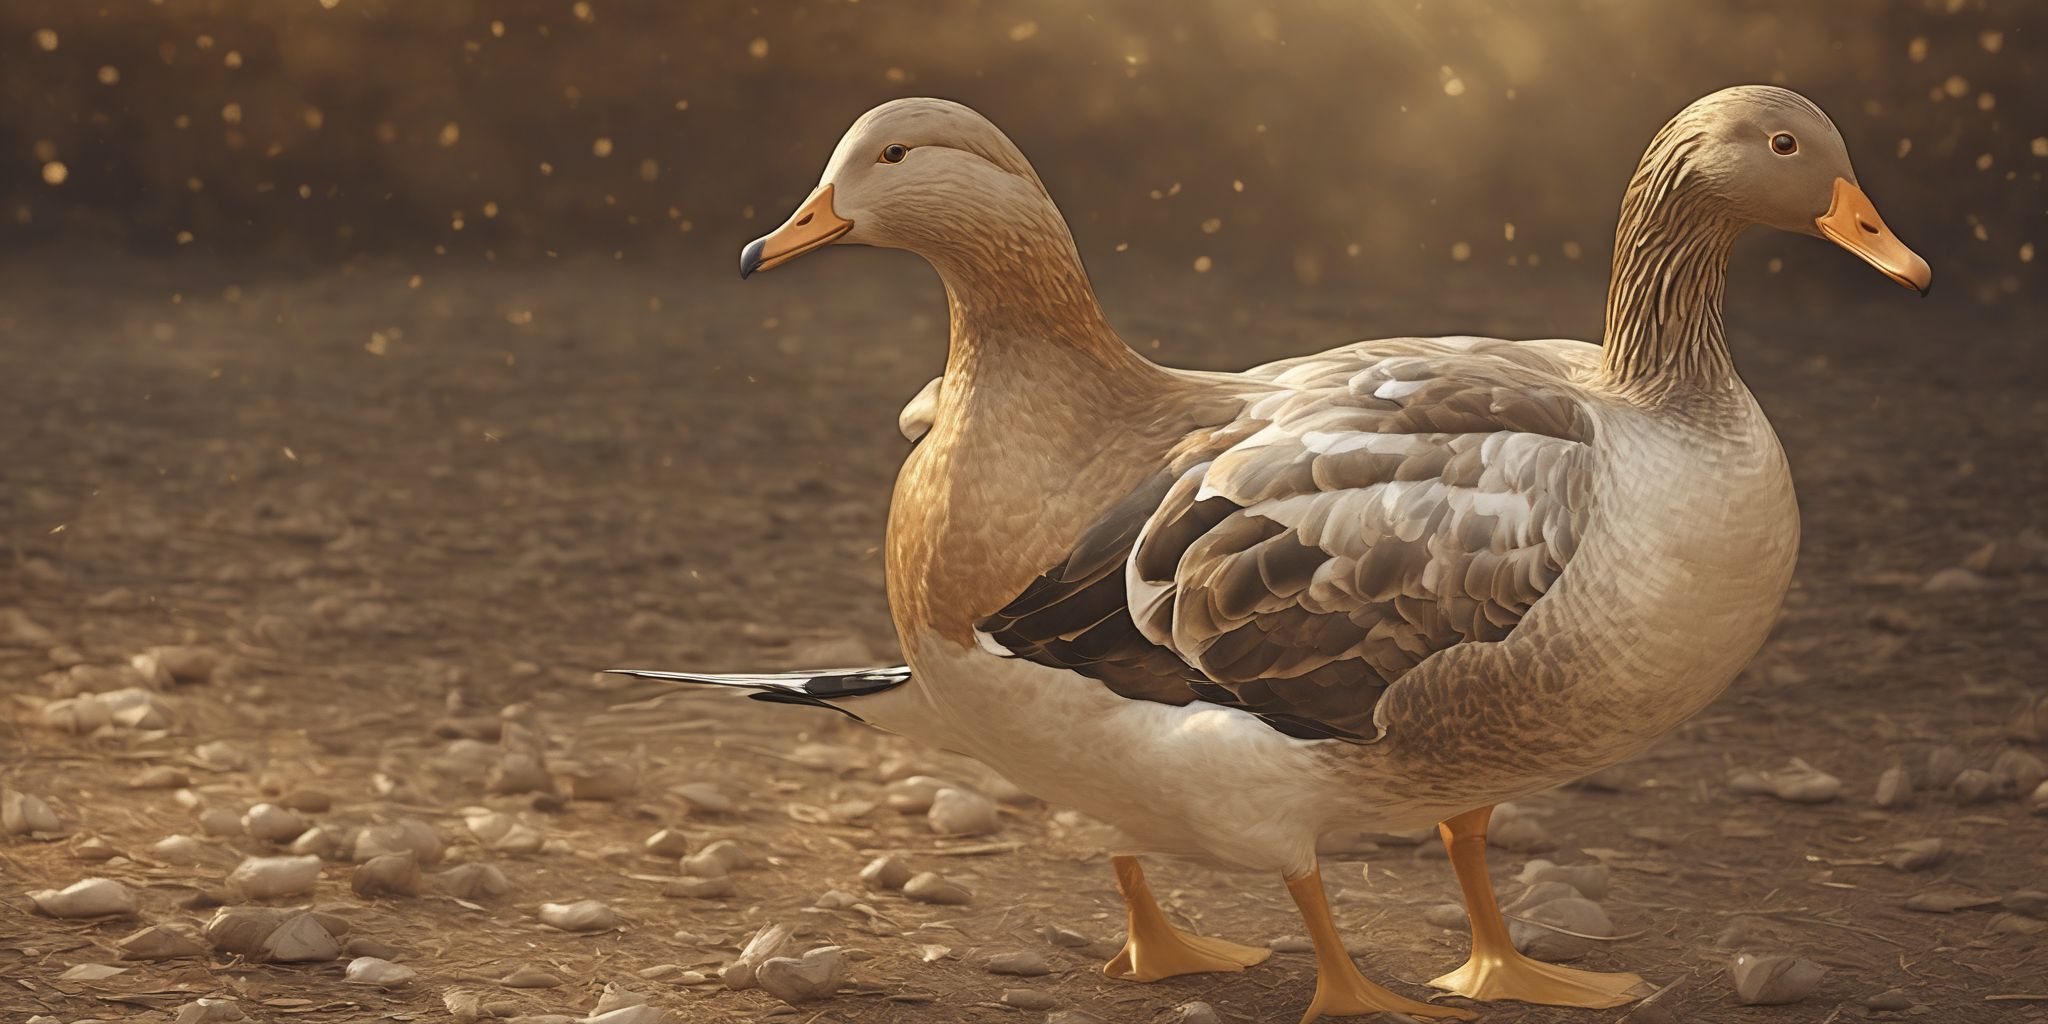 Golden goose  in realistic, photographic style